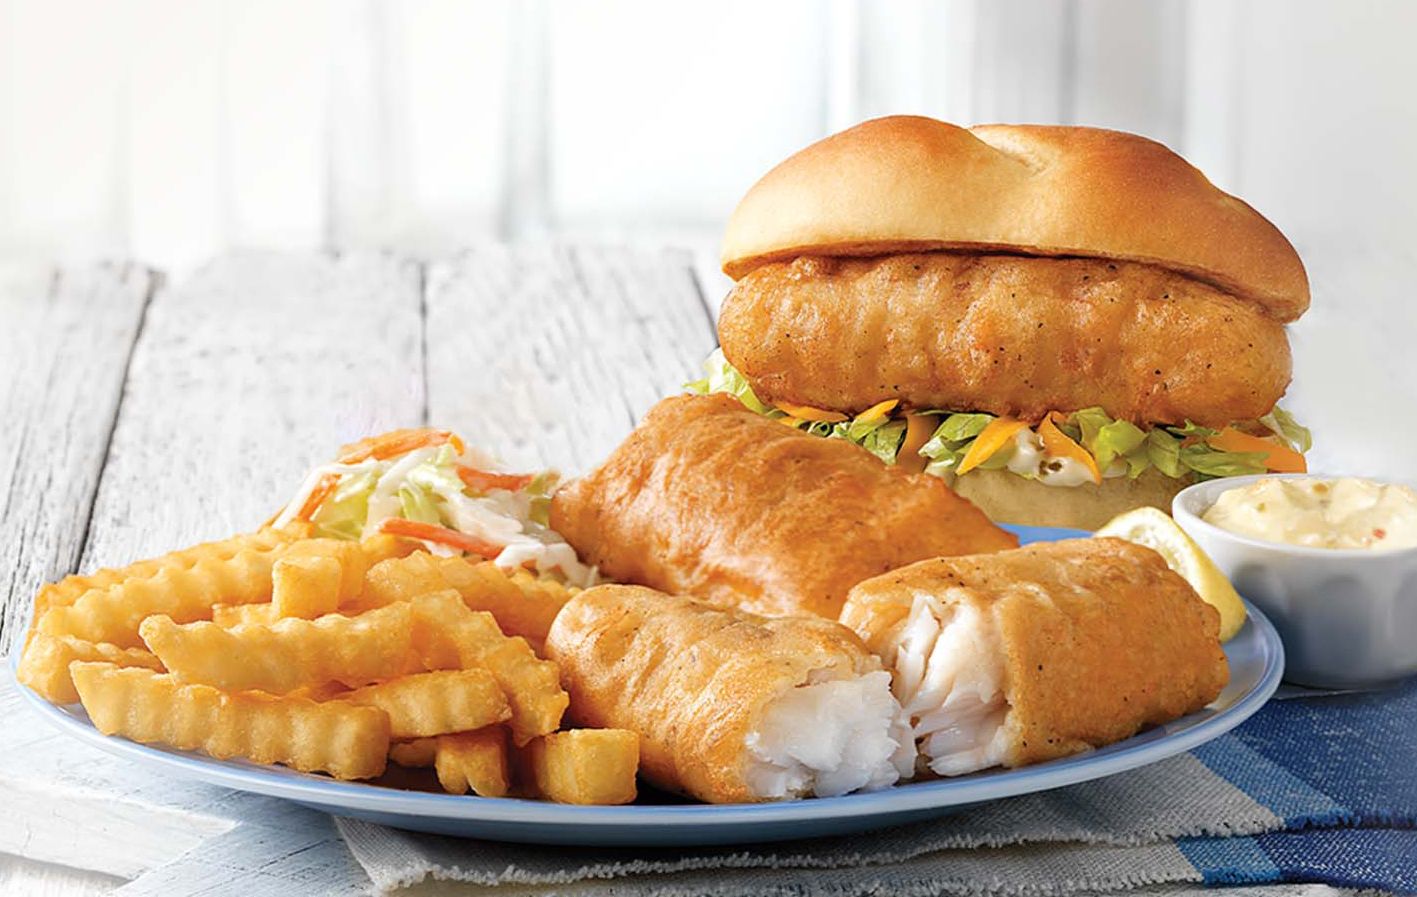 The North Atlantic Cod Filet Sandwich and North Atlantic Cod Dinner are Now at Culver's 